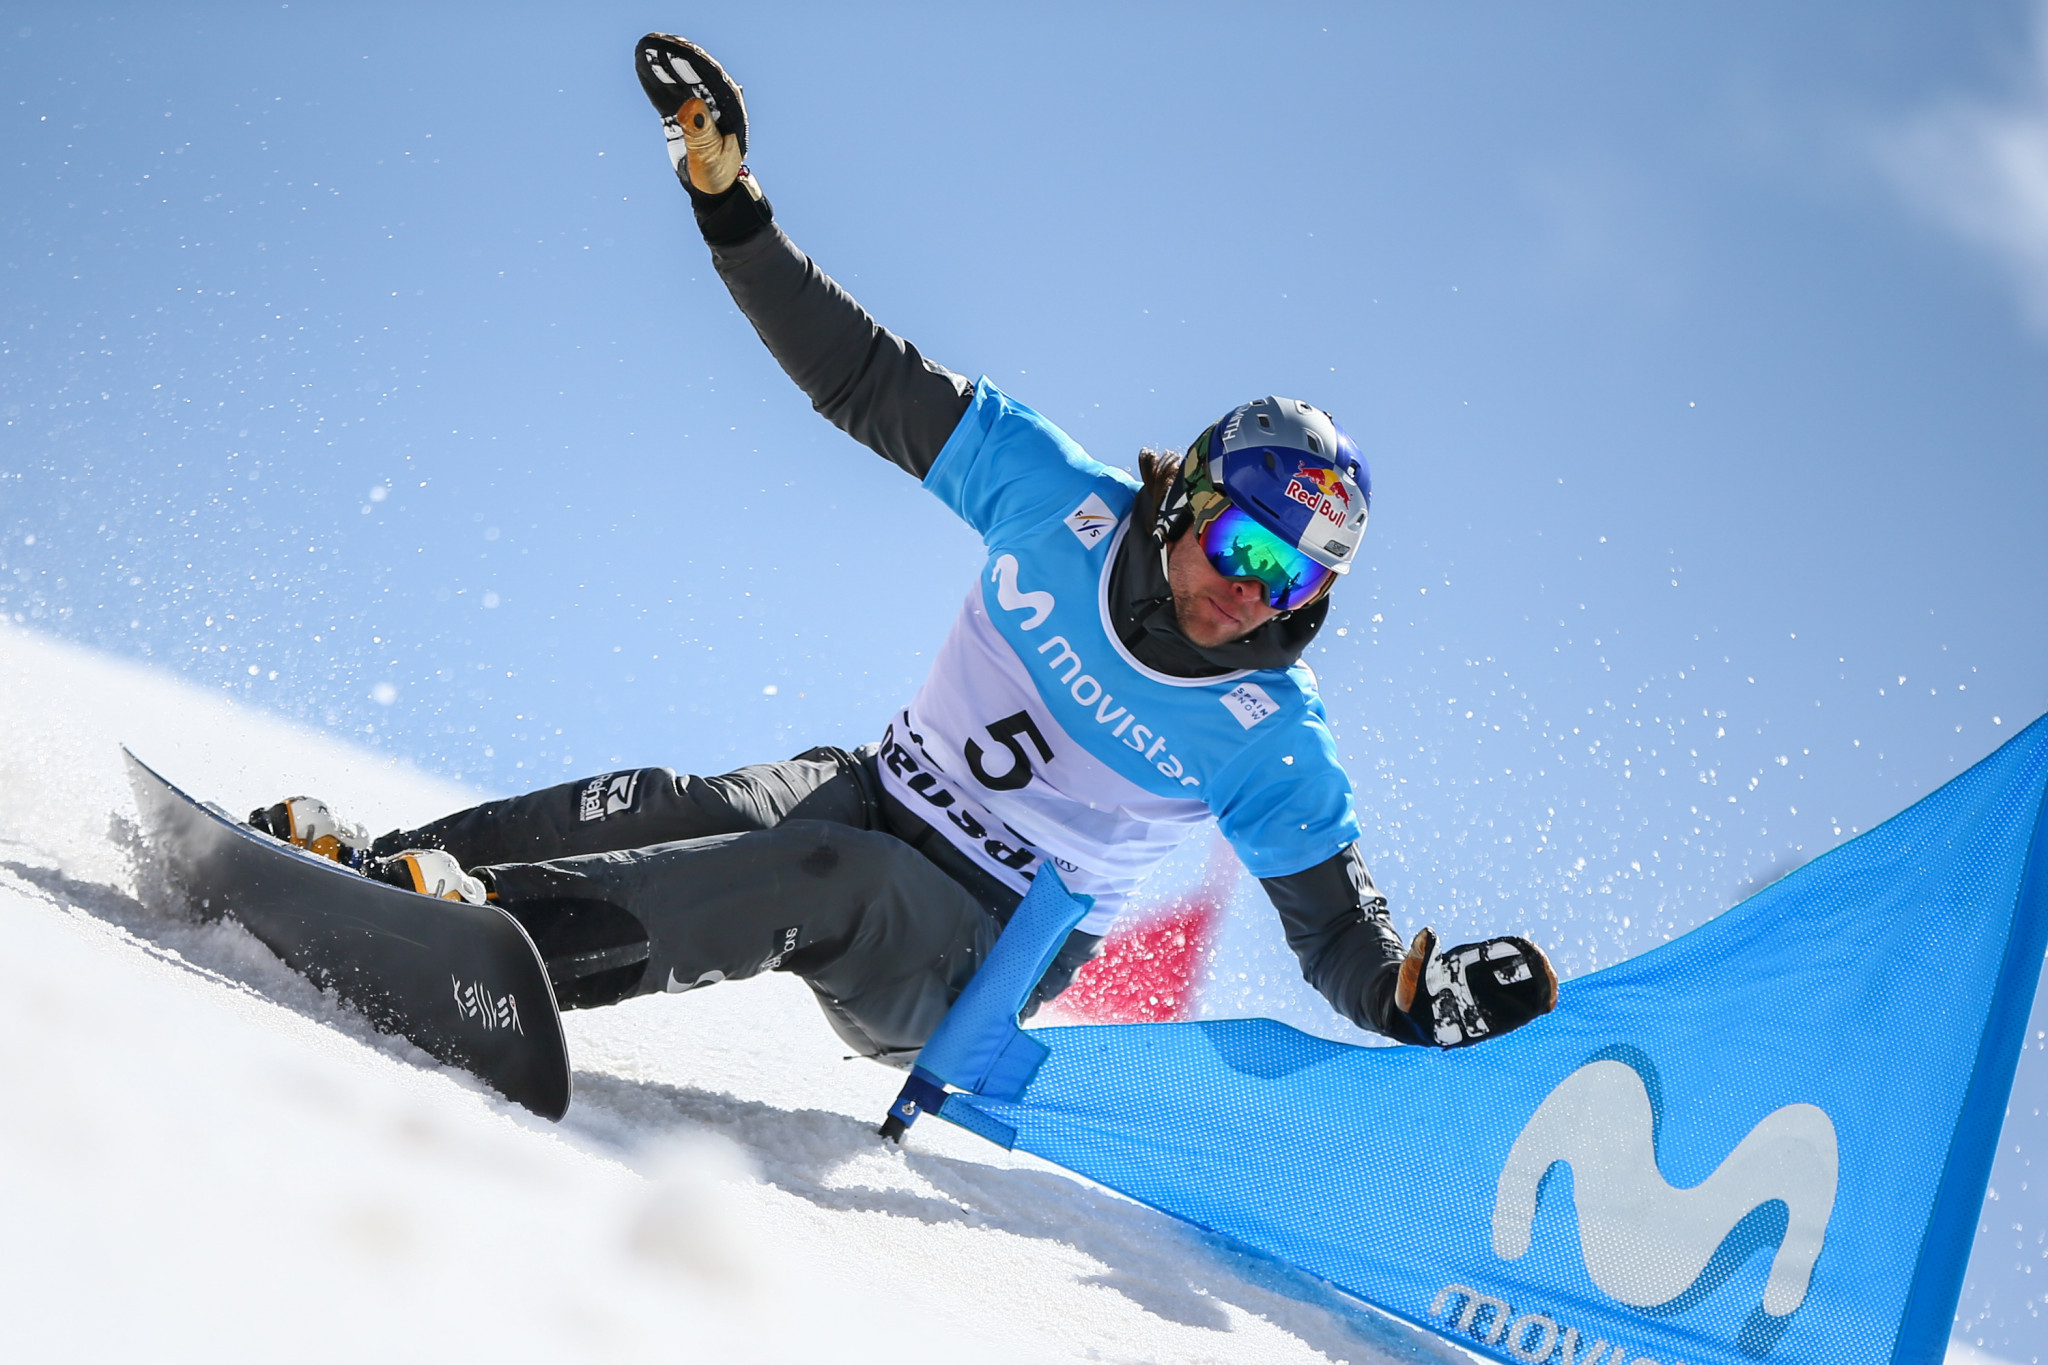 Austria's Benjamin Karl won two medals at this weekend's FIS Snowboard World Cup in Slovenia ©Getty Images